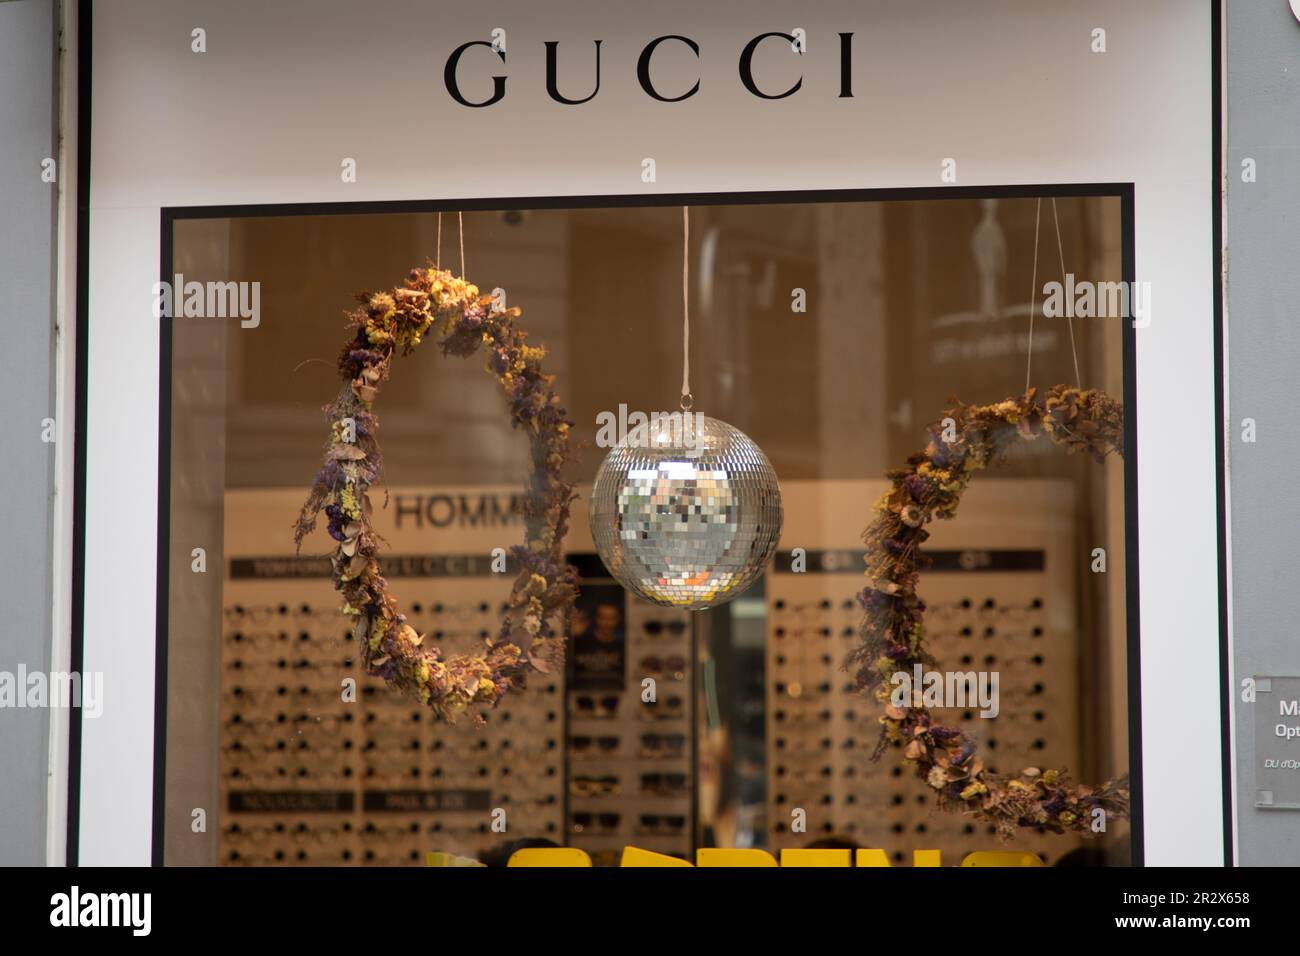 Bordeaux , Aquitaine France - 05 19 2023 : gucci logo brand and text sign  entrance boutique leather handbag pattern luxury fashion store windows faca  Stock Photo - Alamy